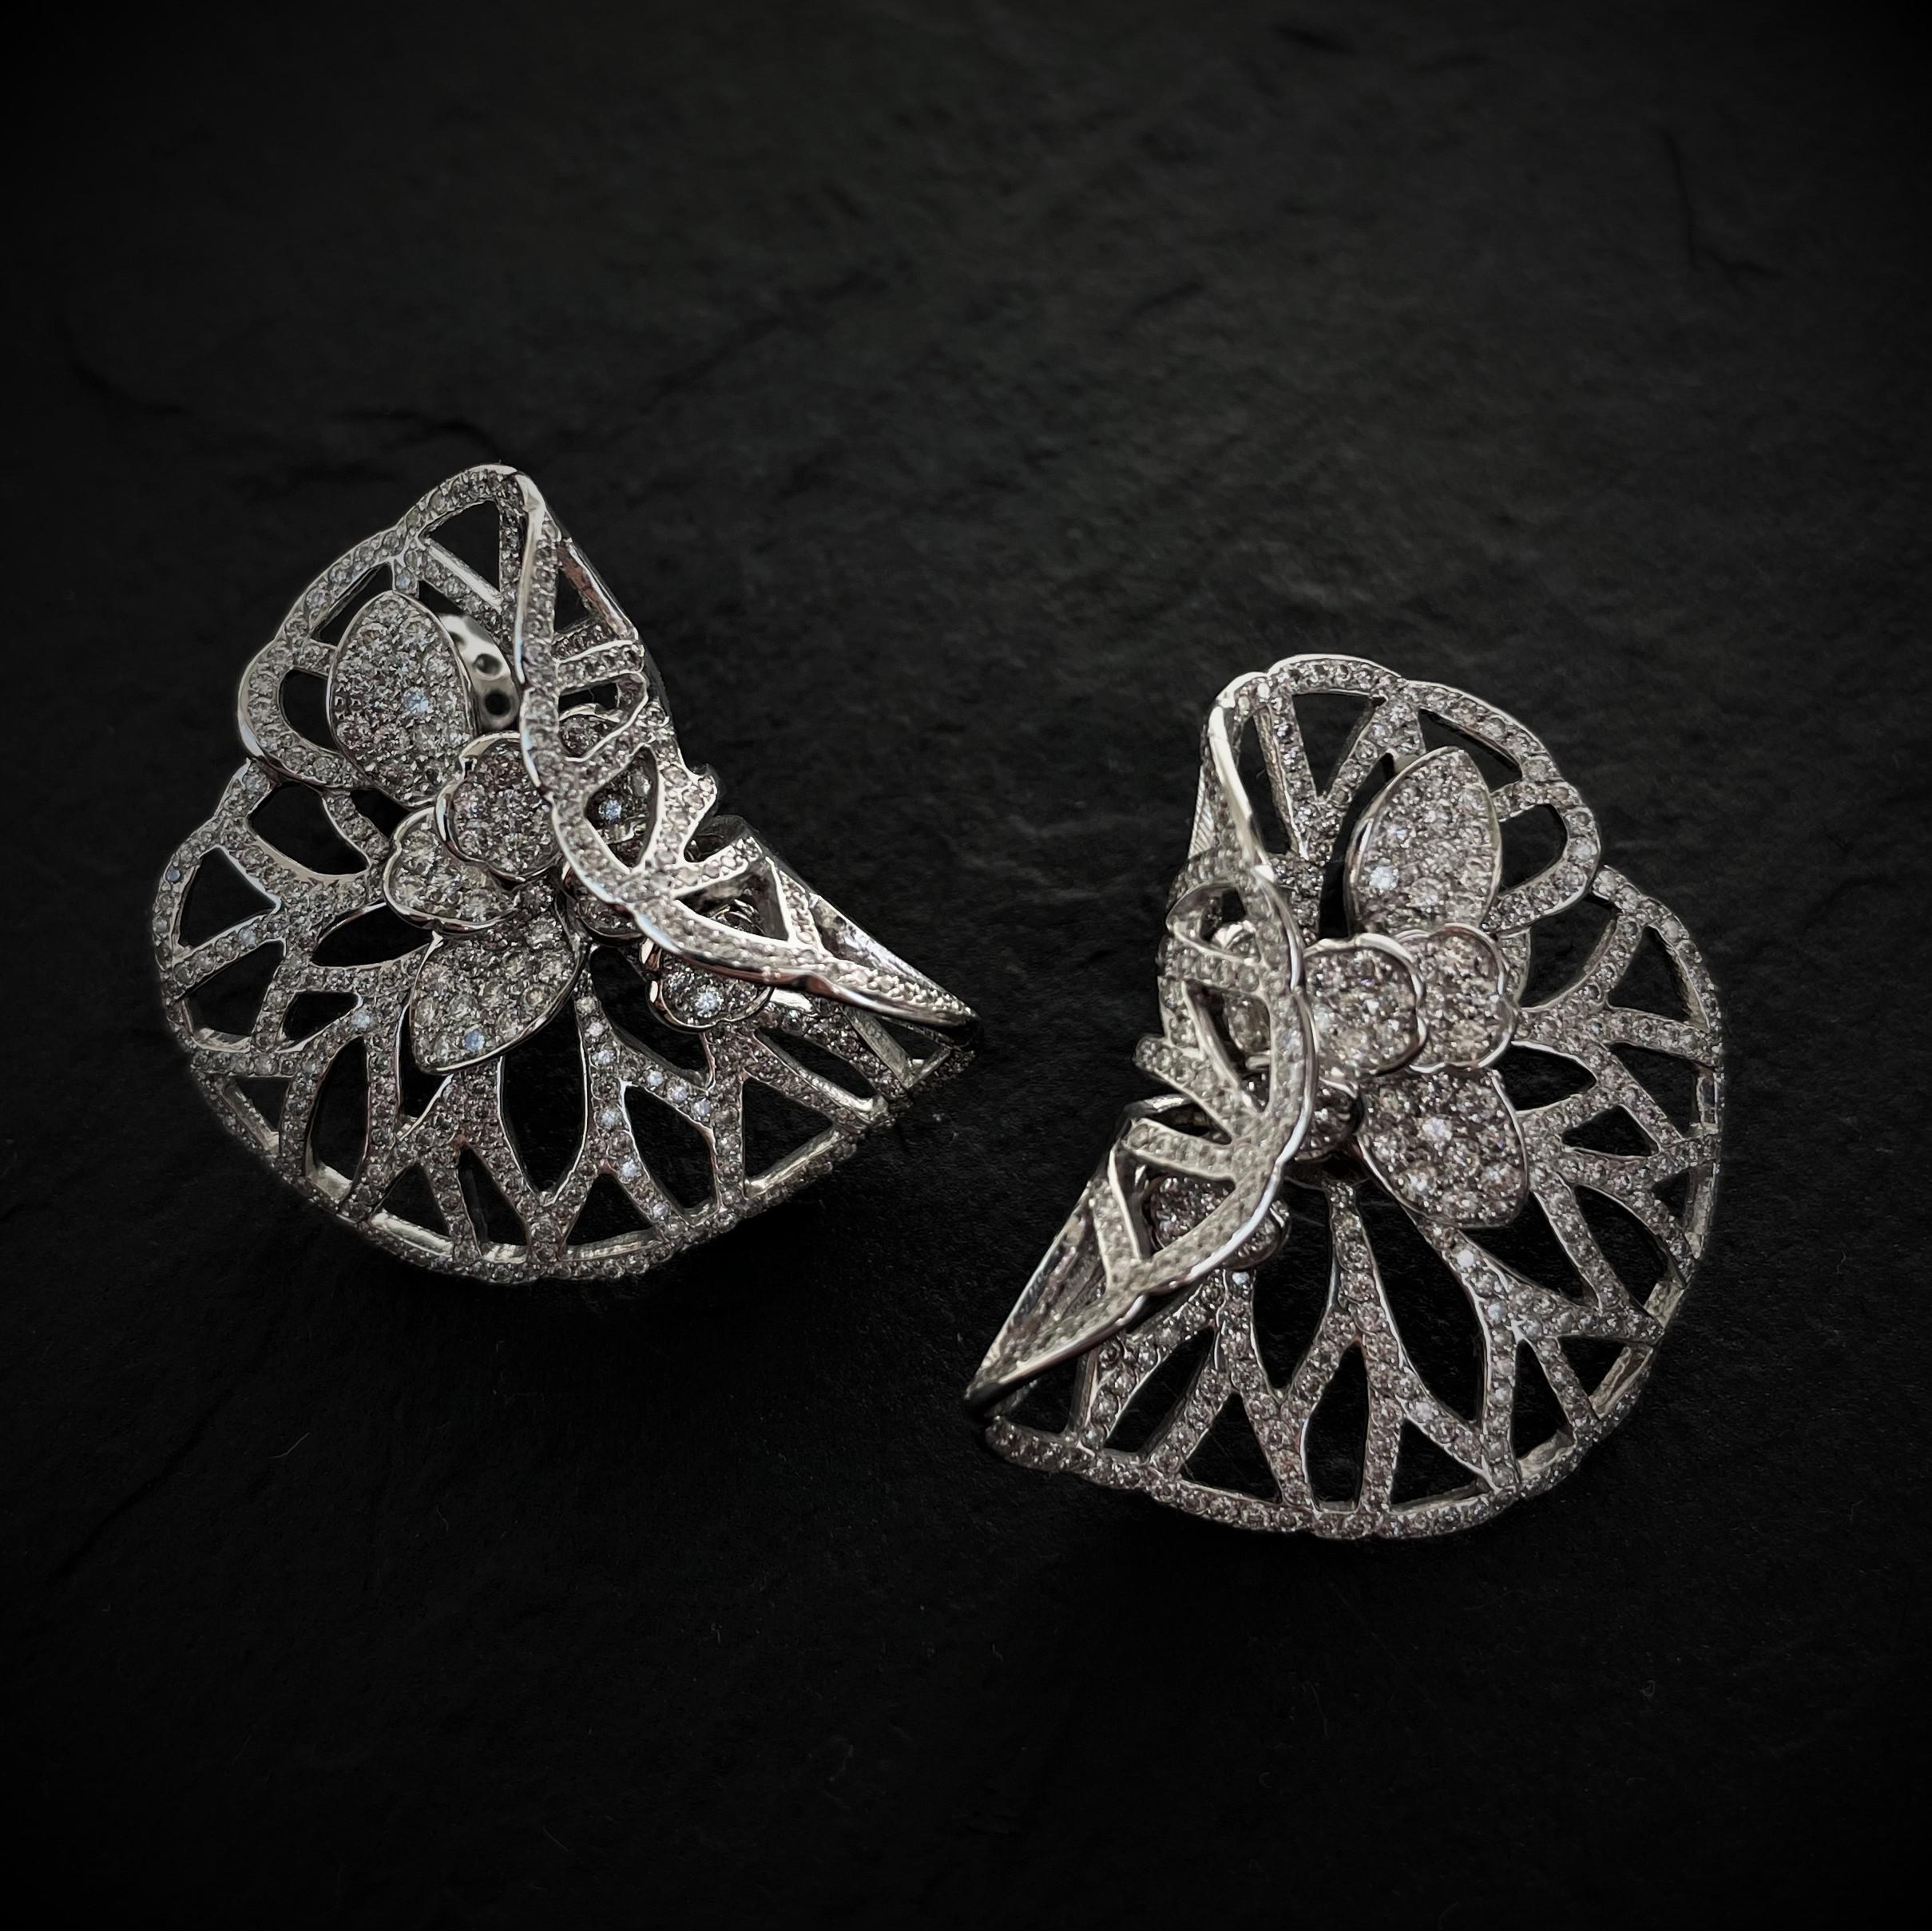 Round Cut Rosior one-off Diamond Drop Earrings set in White Gold